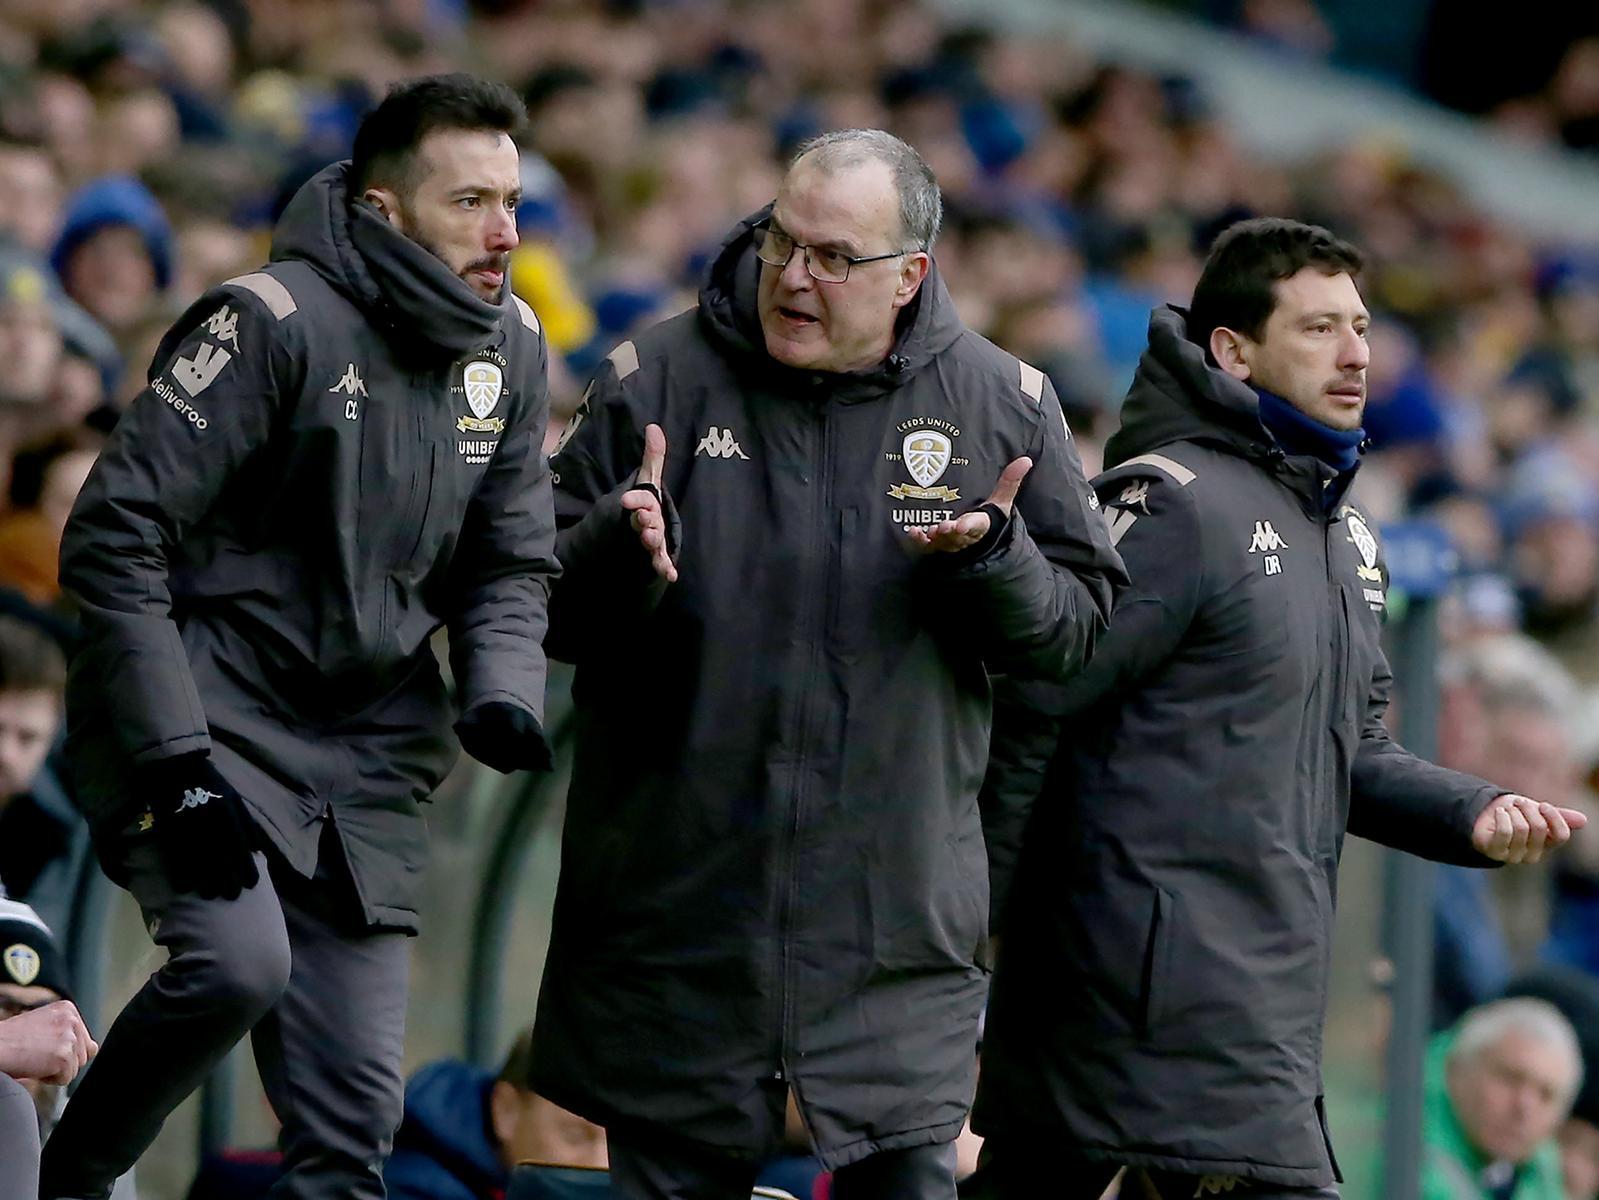 Leeds United are in action again